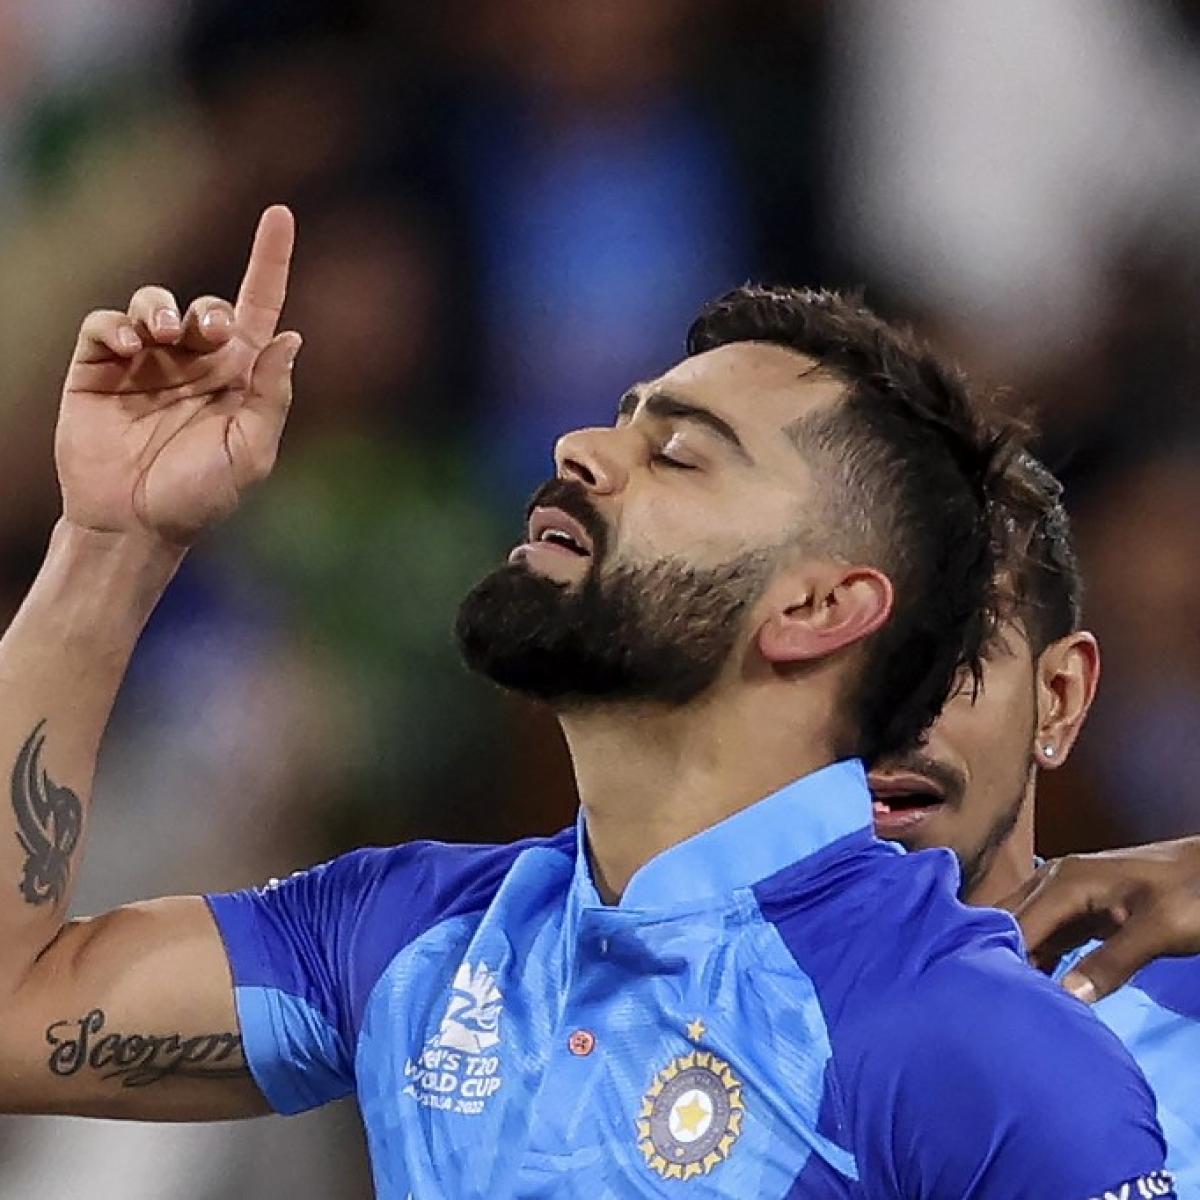 T20 World Cup: Virat Kohli in tears, lifted by Rohit Sharma as India celebrate win thriller vs Pakistan at MCG